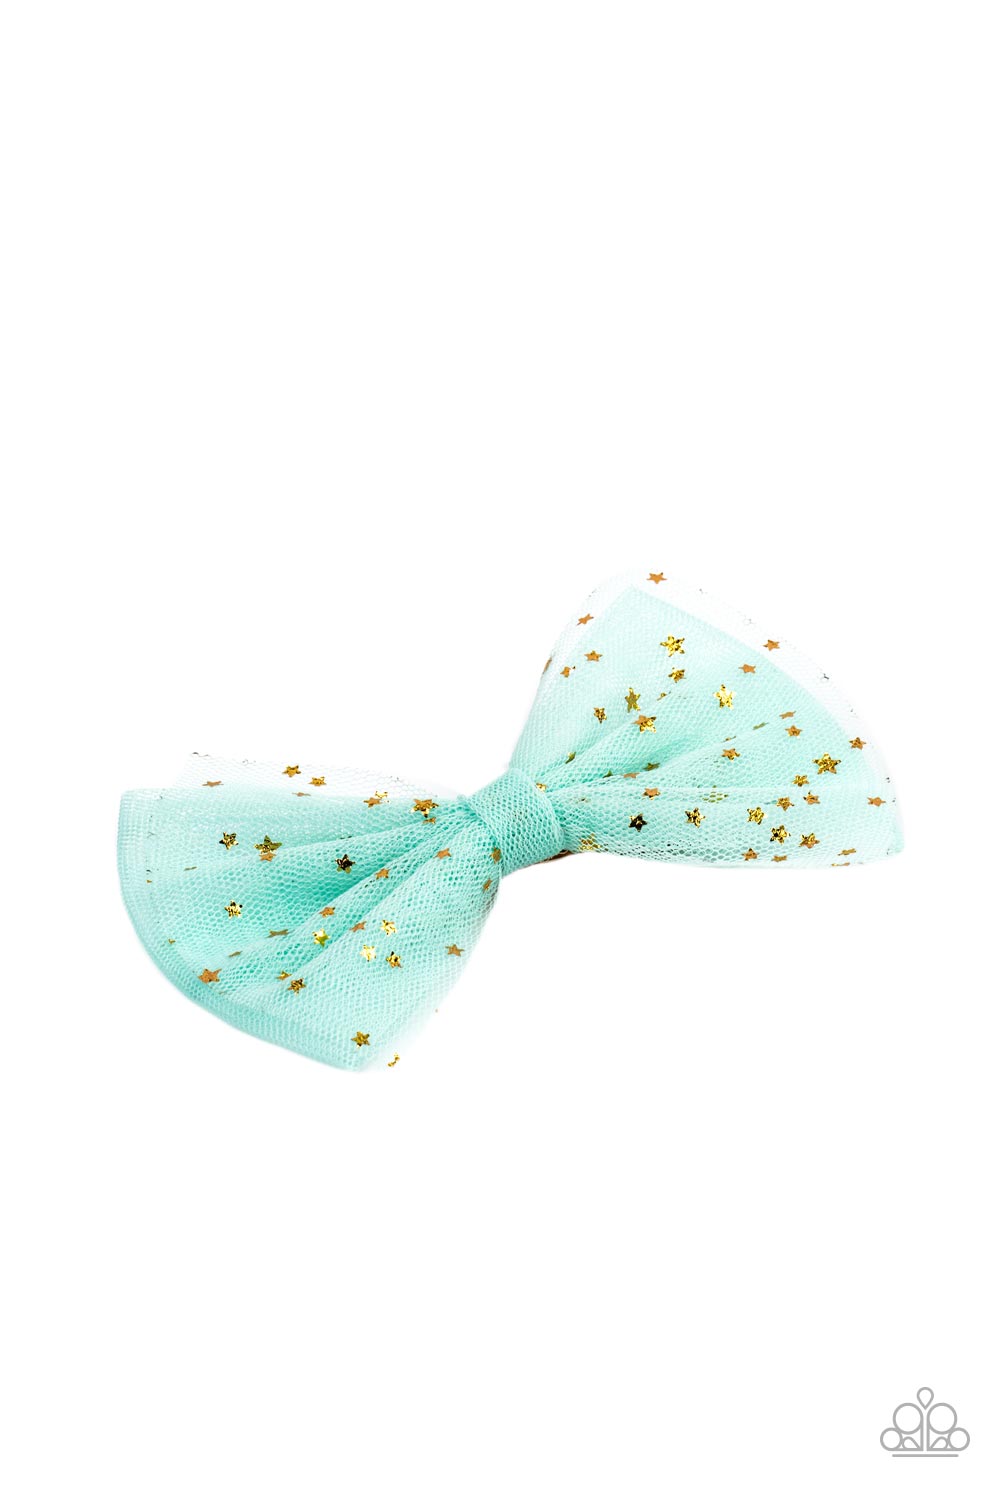 Paparazzi - Twinkly Tulle - Green Hair Clip